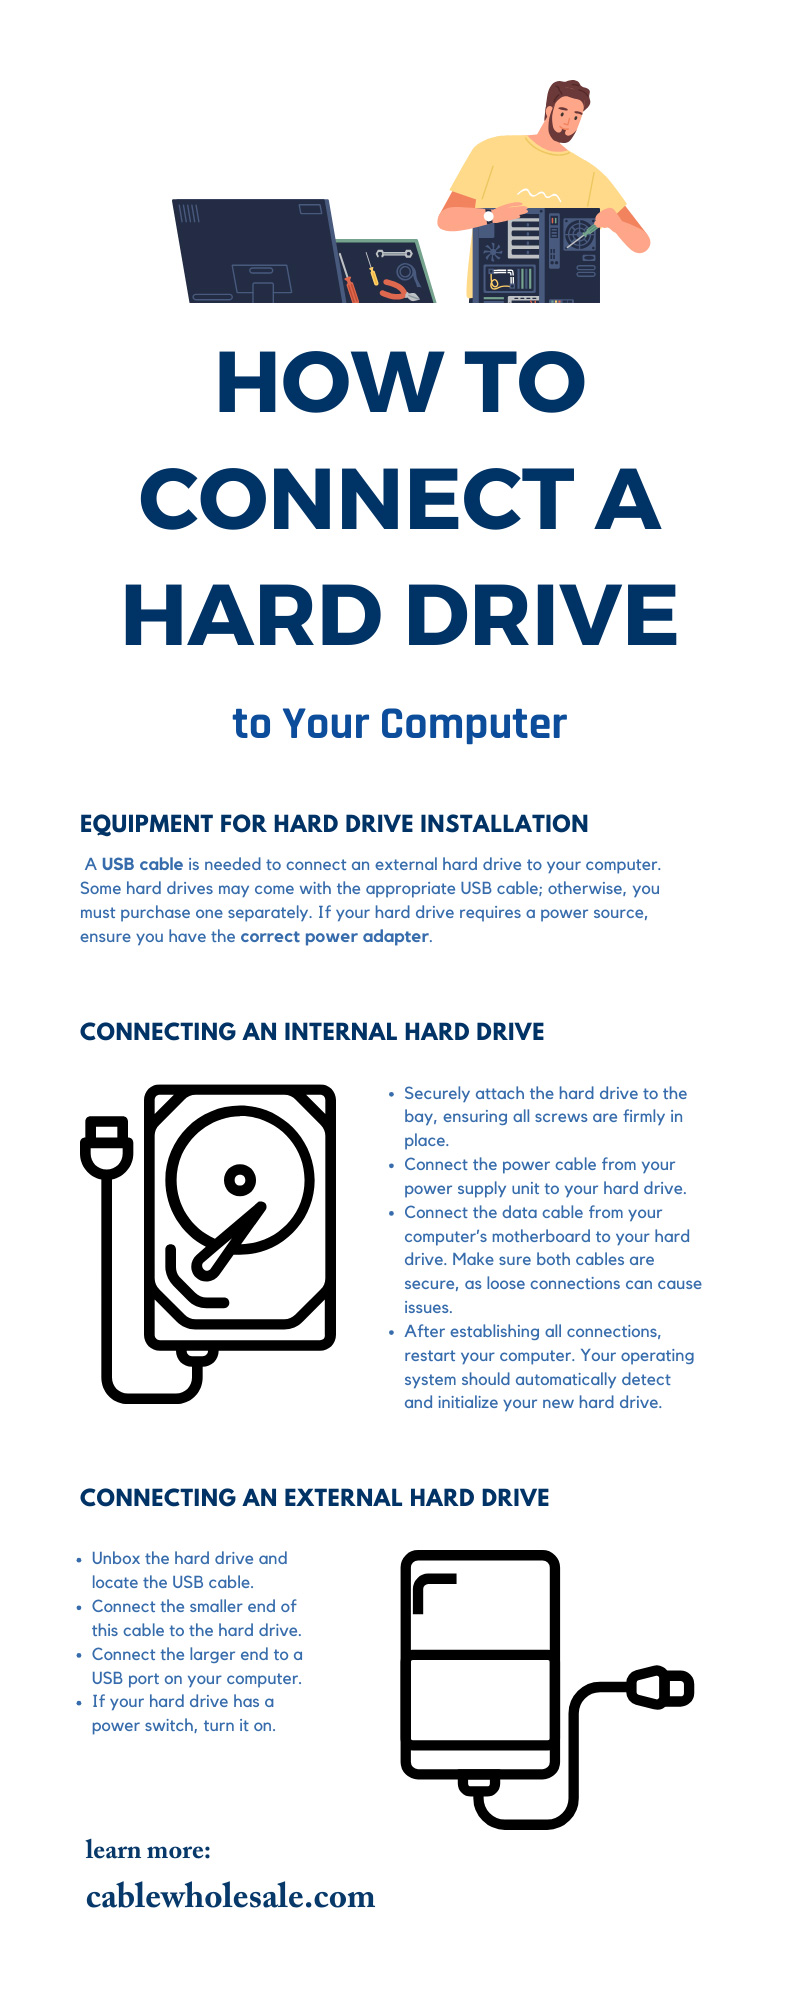 How To Connect a Hard Drive to Your Computer
